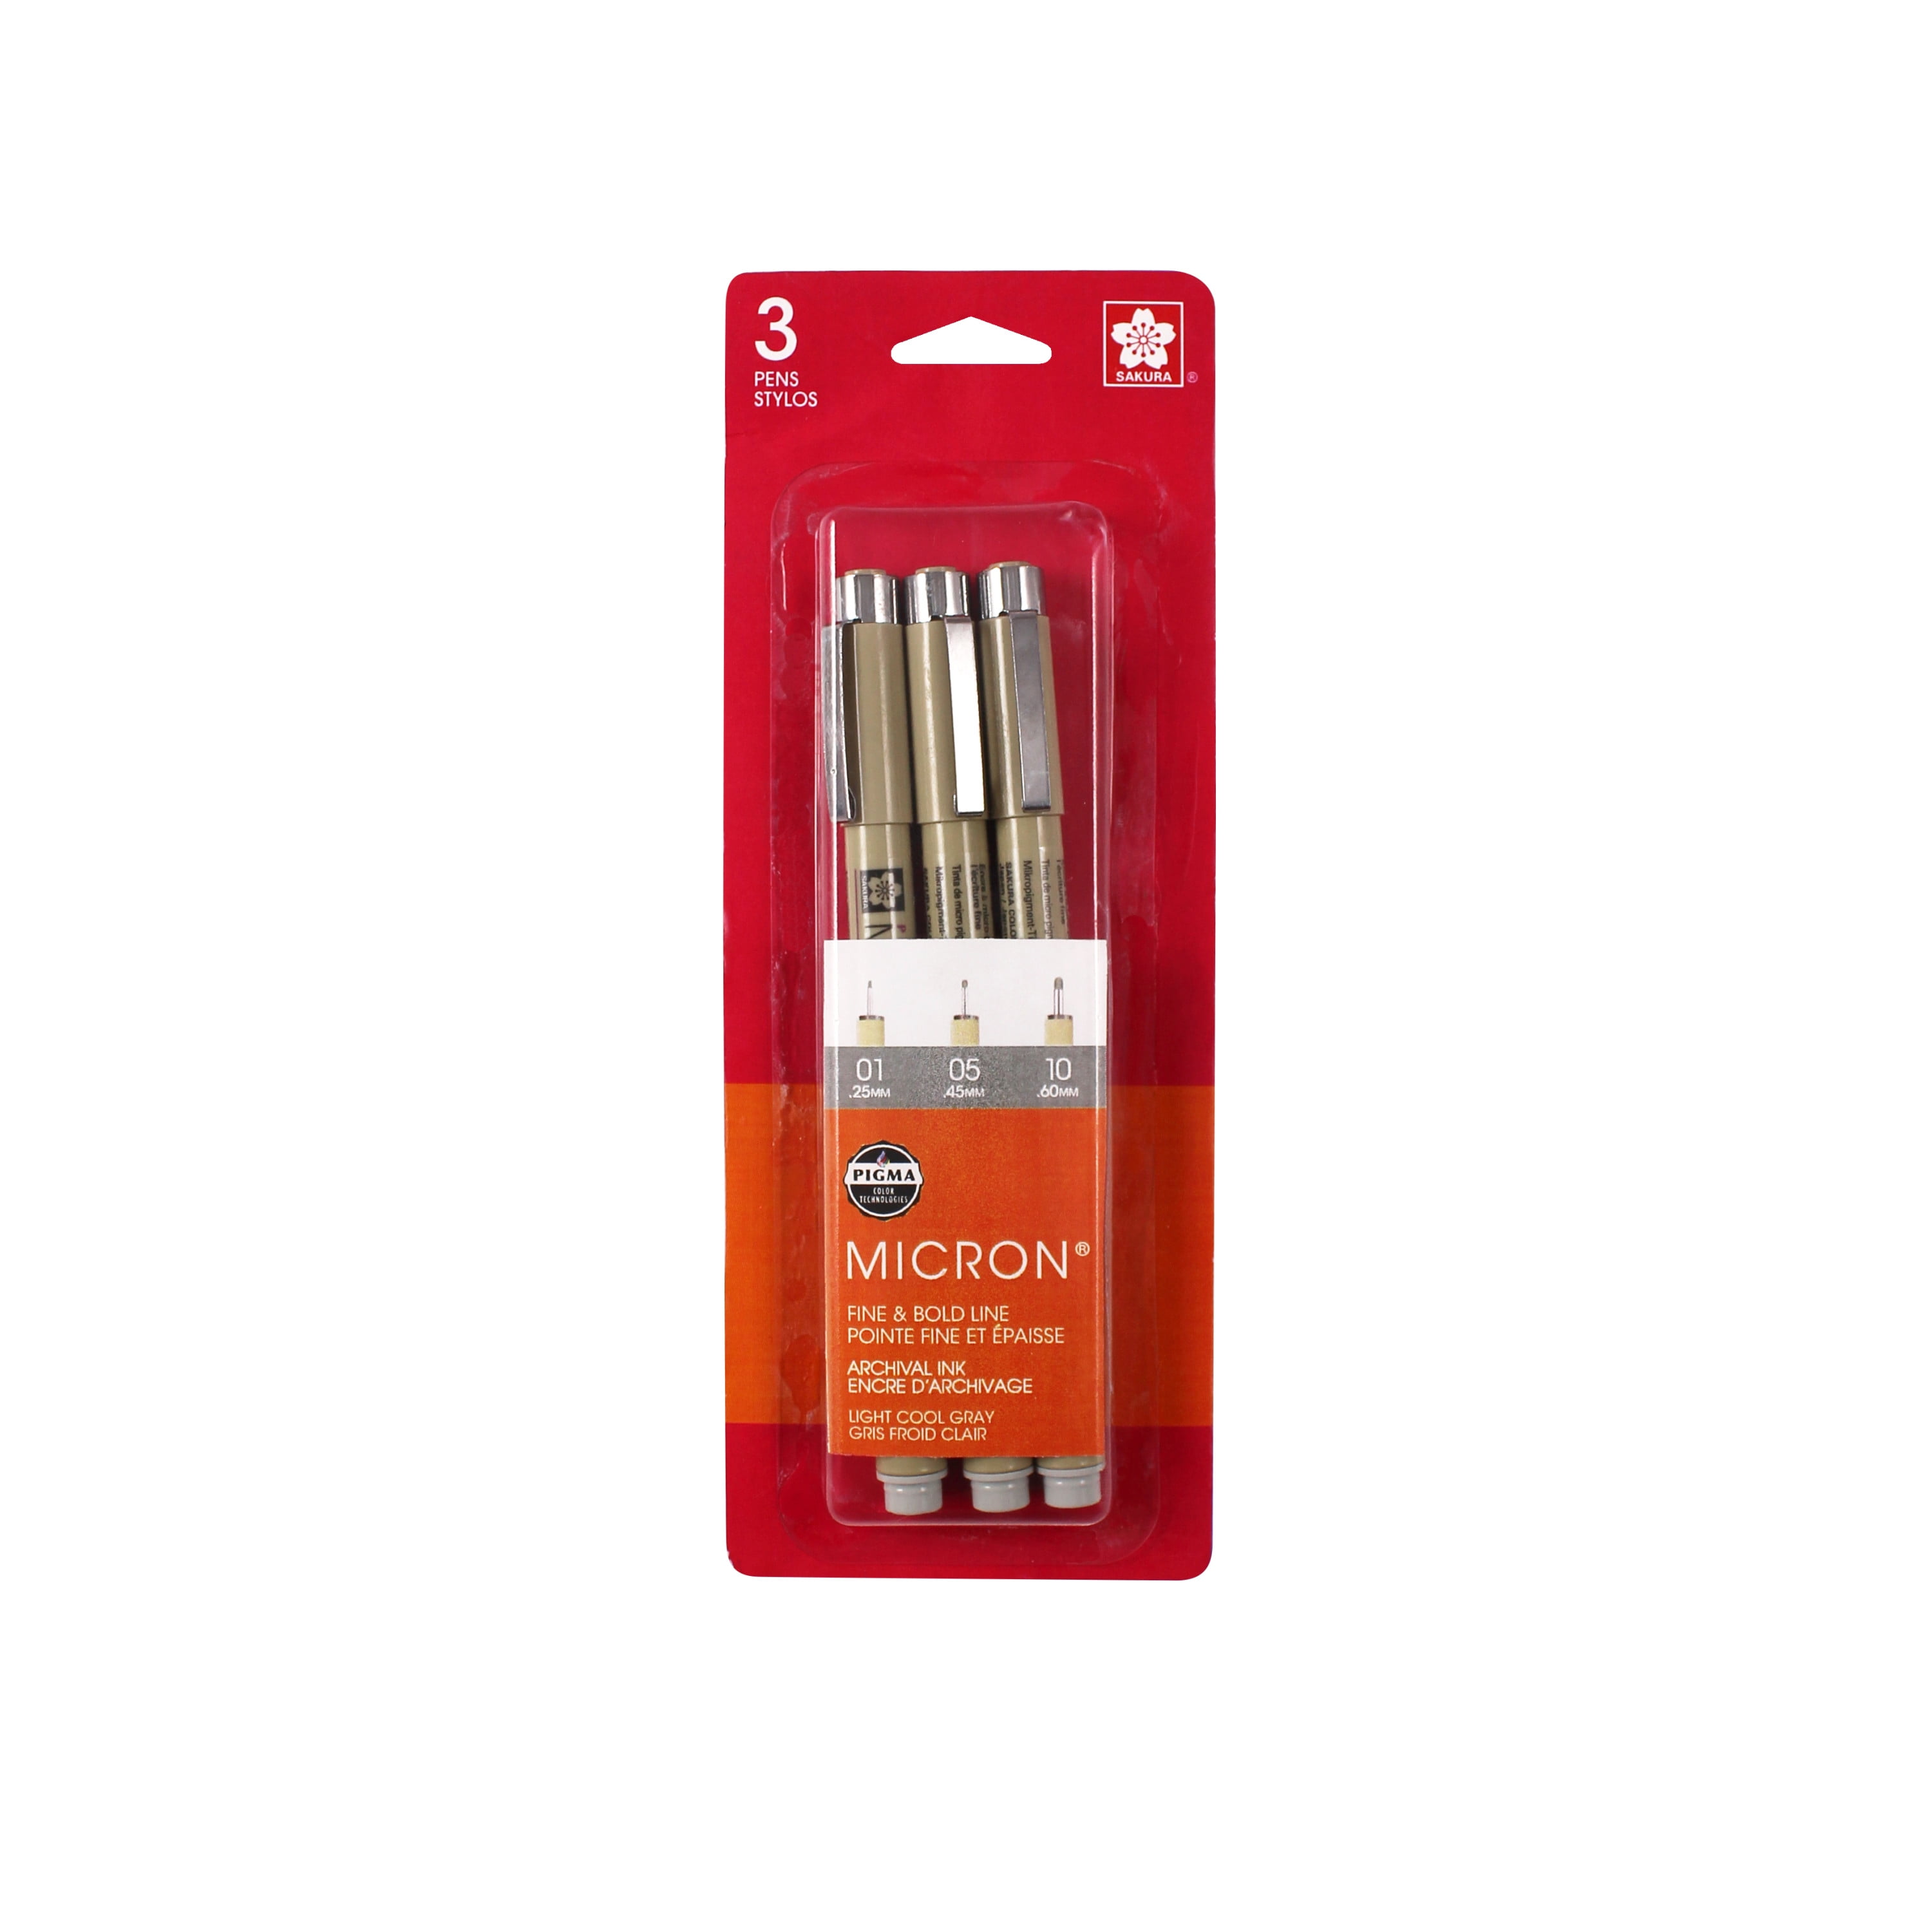 Sakura Pigma Micron Fineliner Pens - Archival Light Cool Gray Ink Pens -  Pens for Writing, Drawing, or Journaling - Assorted Point Sizes - 3 Pack 